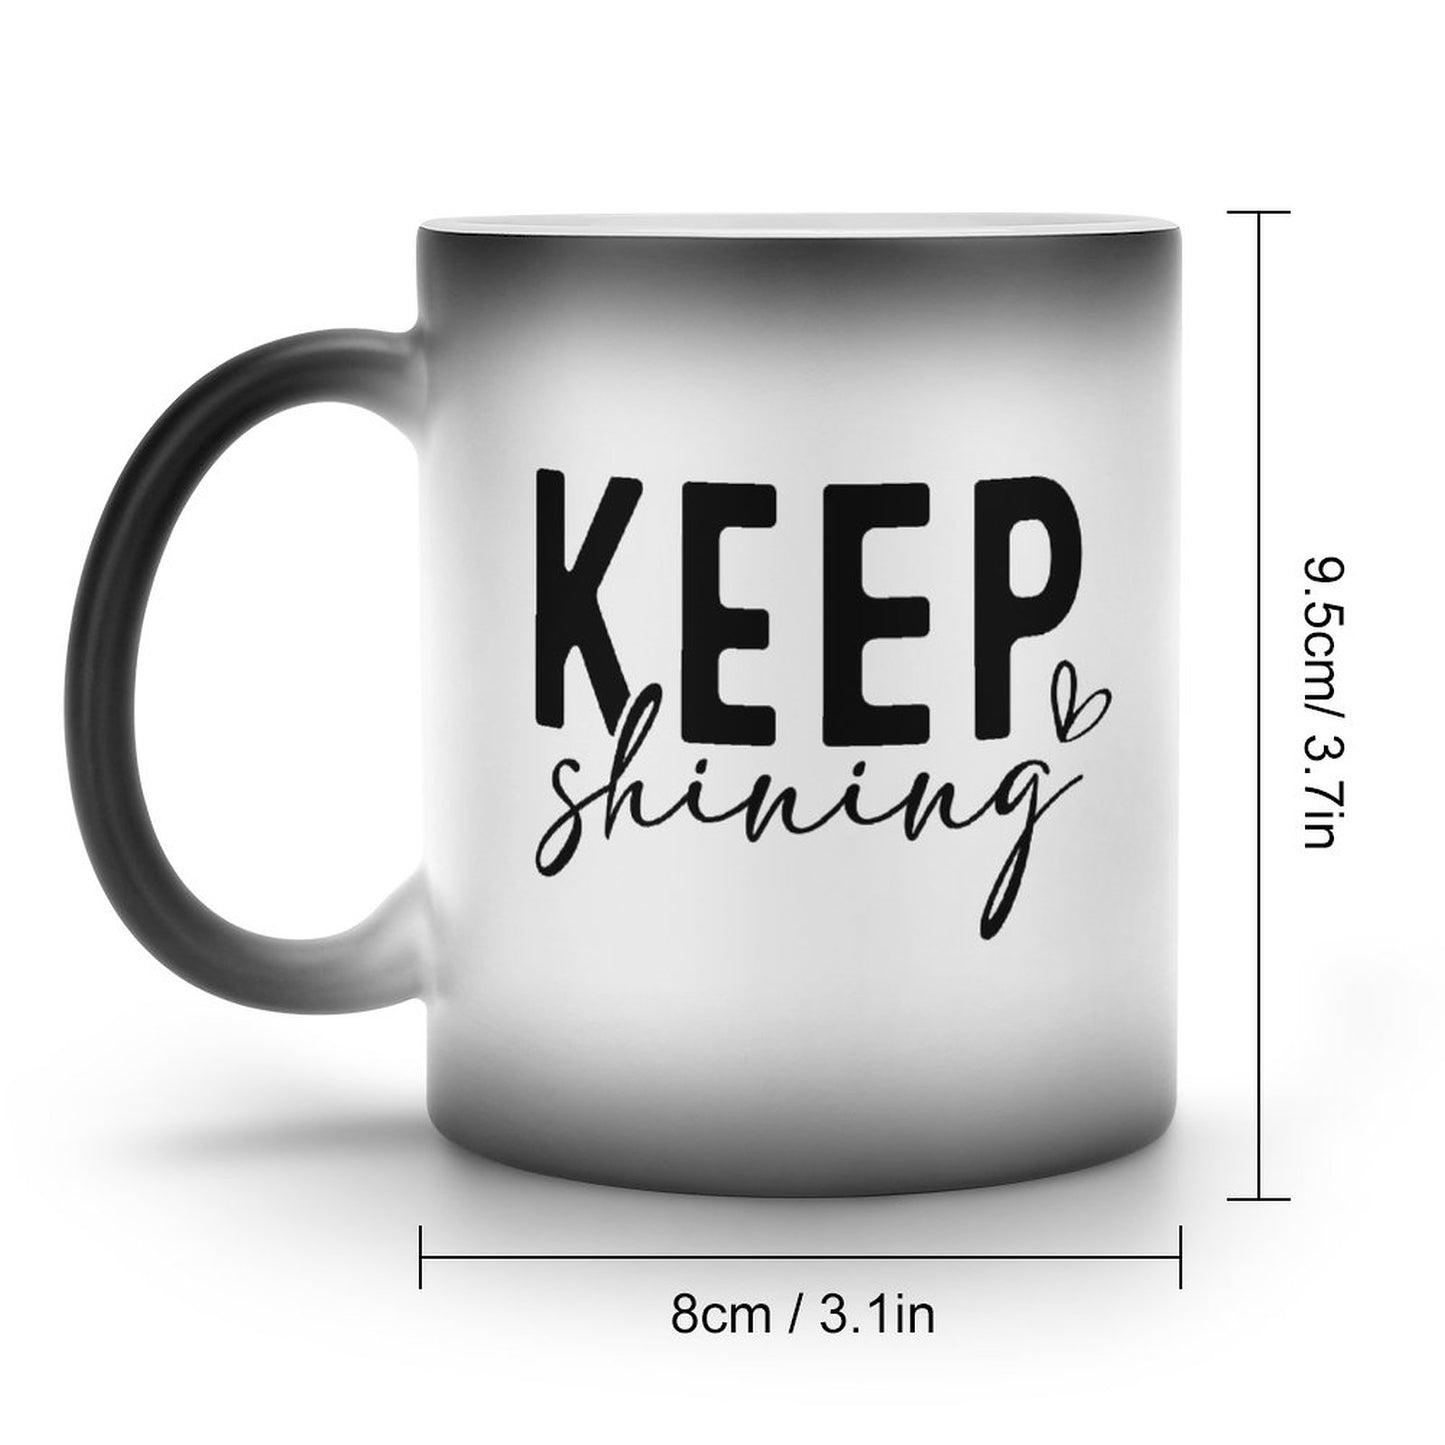 Keep Shining Your Worth Has Already Been Affirmed By God Christian Color Changing Mug (Dual-sided)